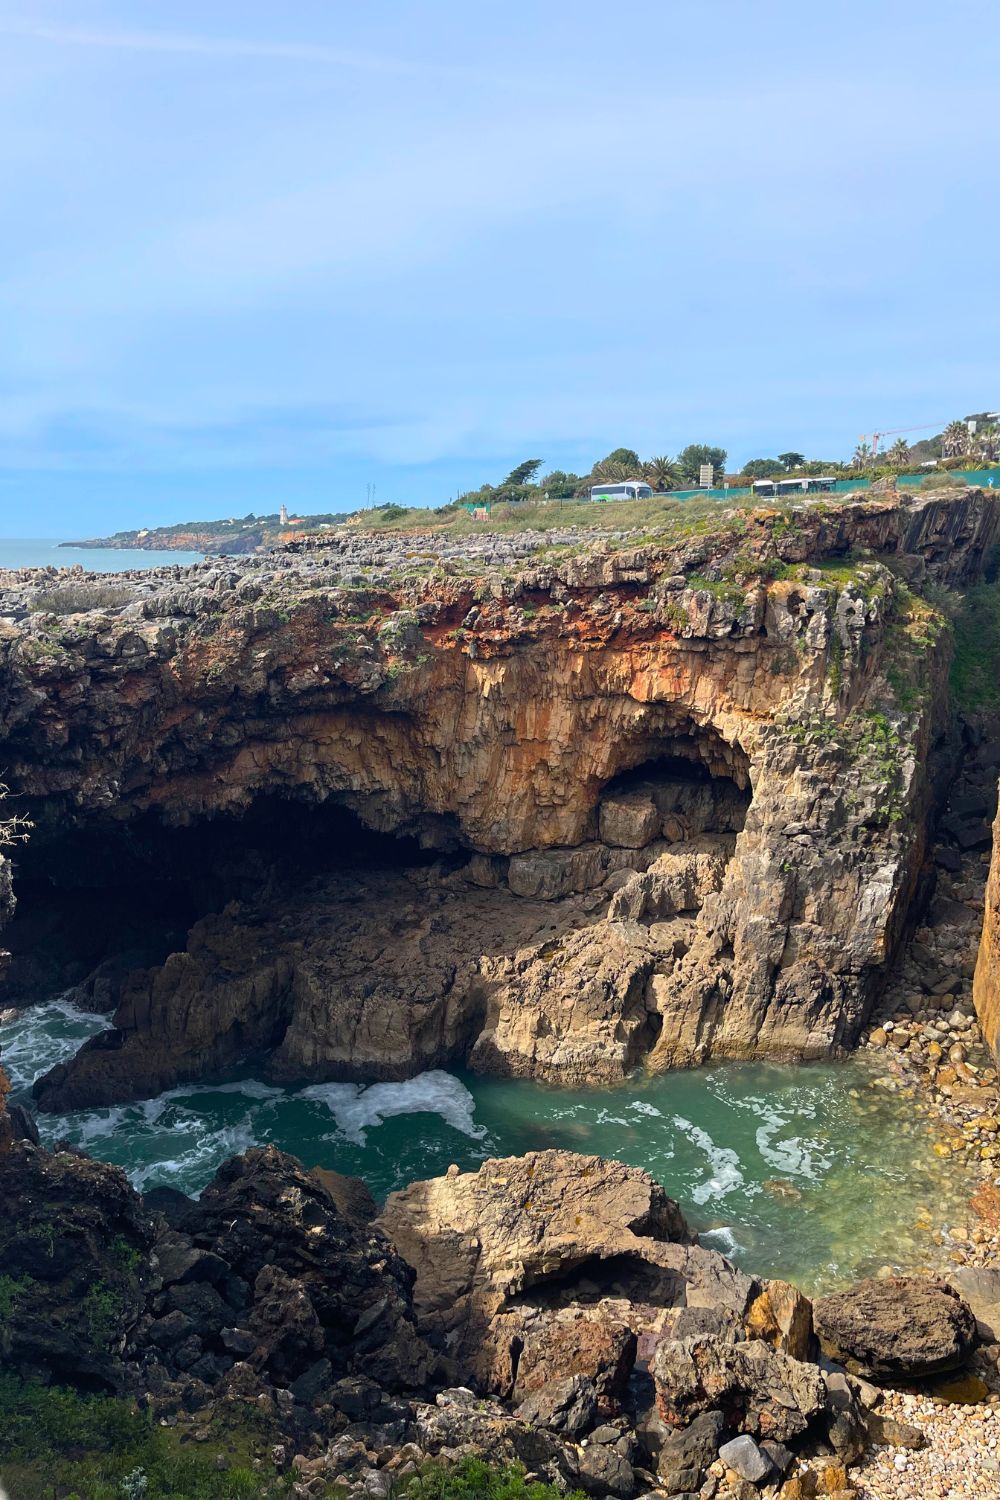 A breathtaking view of the natural rock formation known as Hell's Mouth (Boca do Inferno) in Cascais, with a rugged cliff face overlooking a serene sea. The image captures the beauty of the cavernous area where the azure waters of the Atlantic Ocean surge with a tranquil force